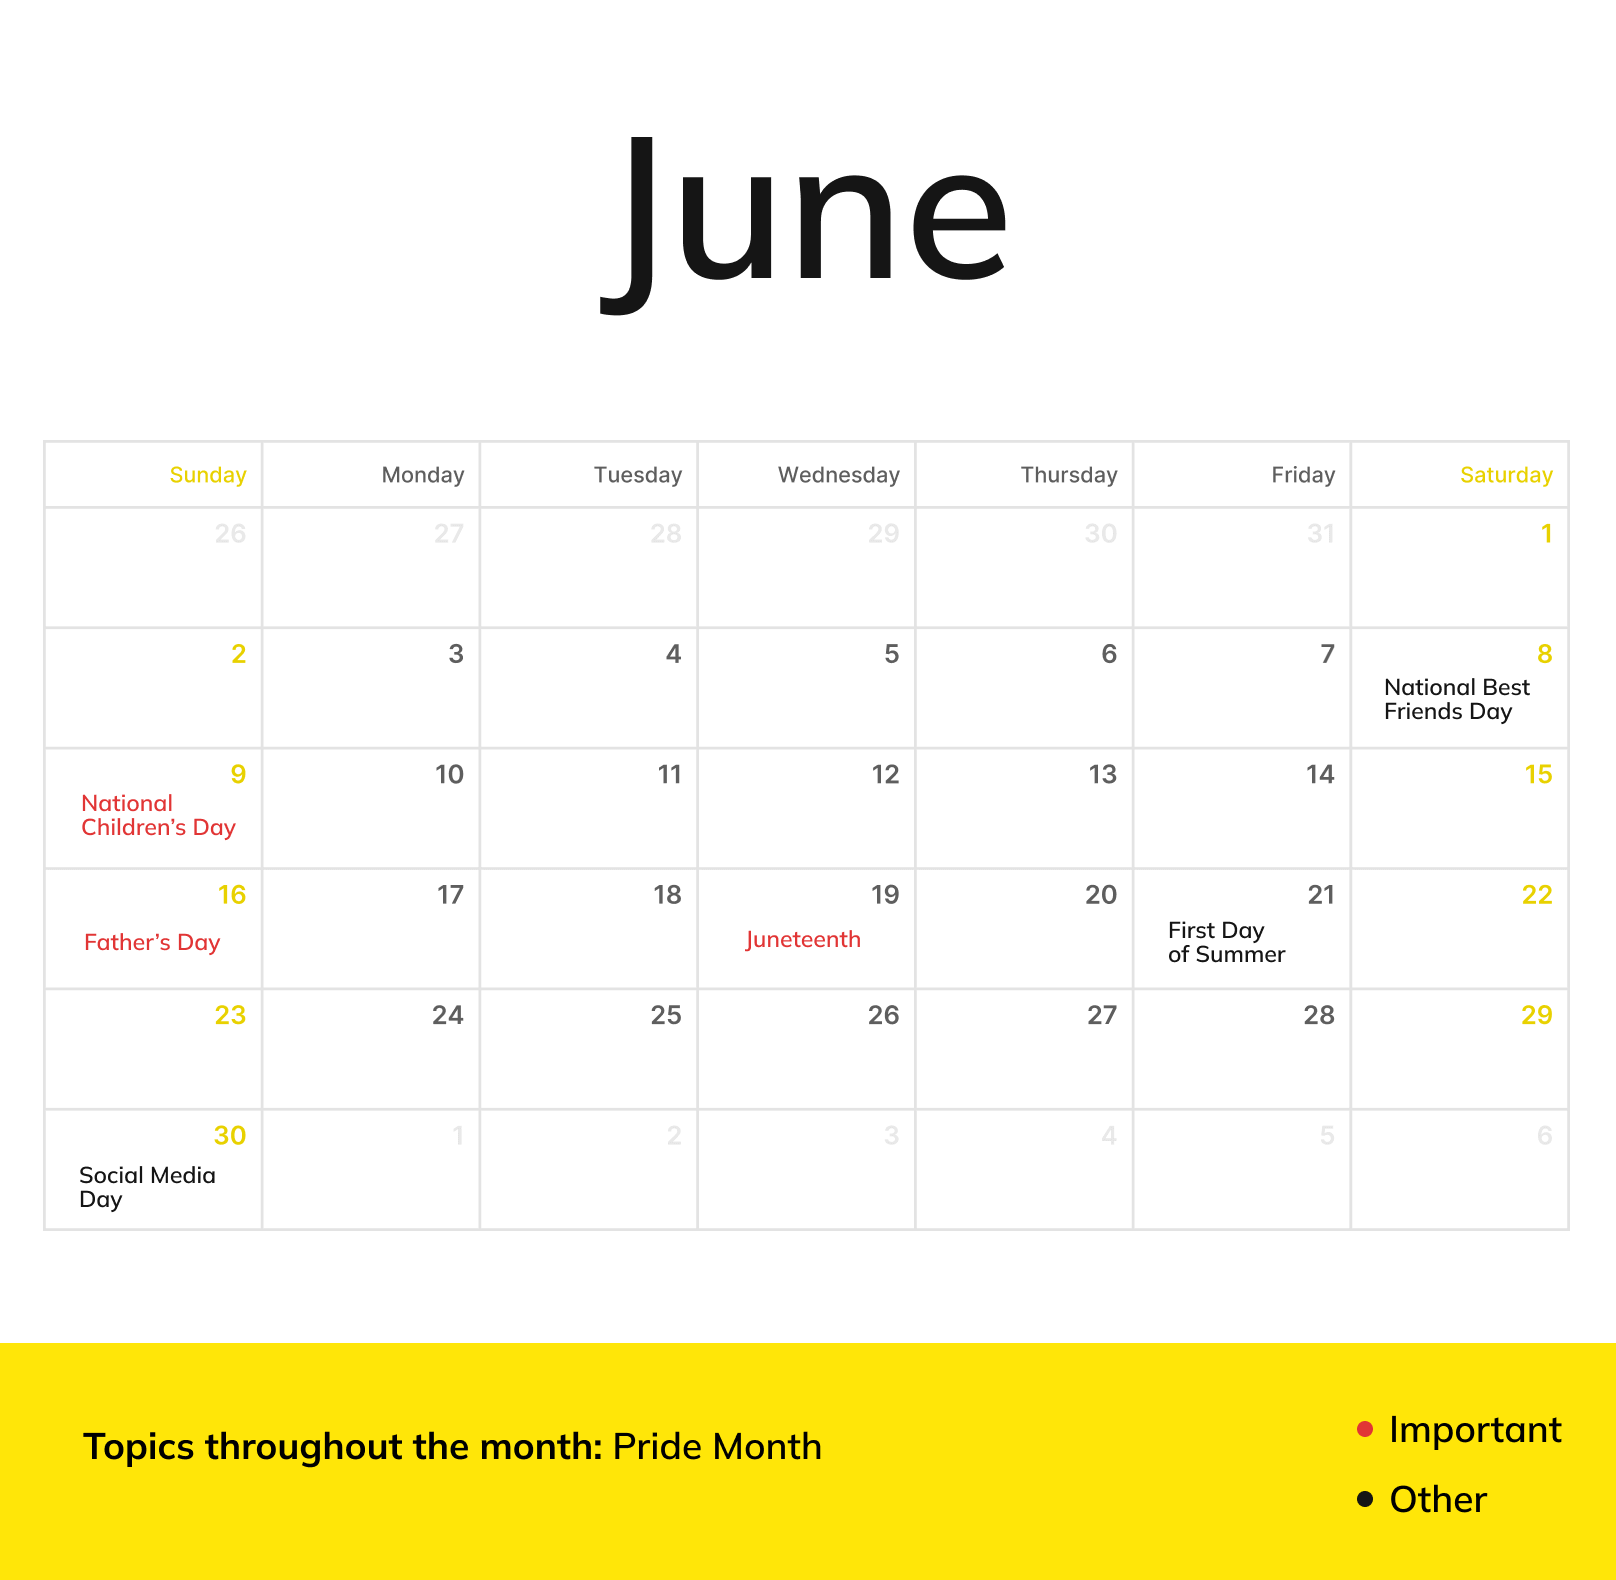 A June monthly calendar with holidays and topics throughout the month being Pride Month